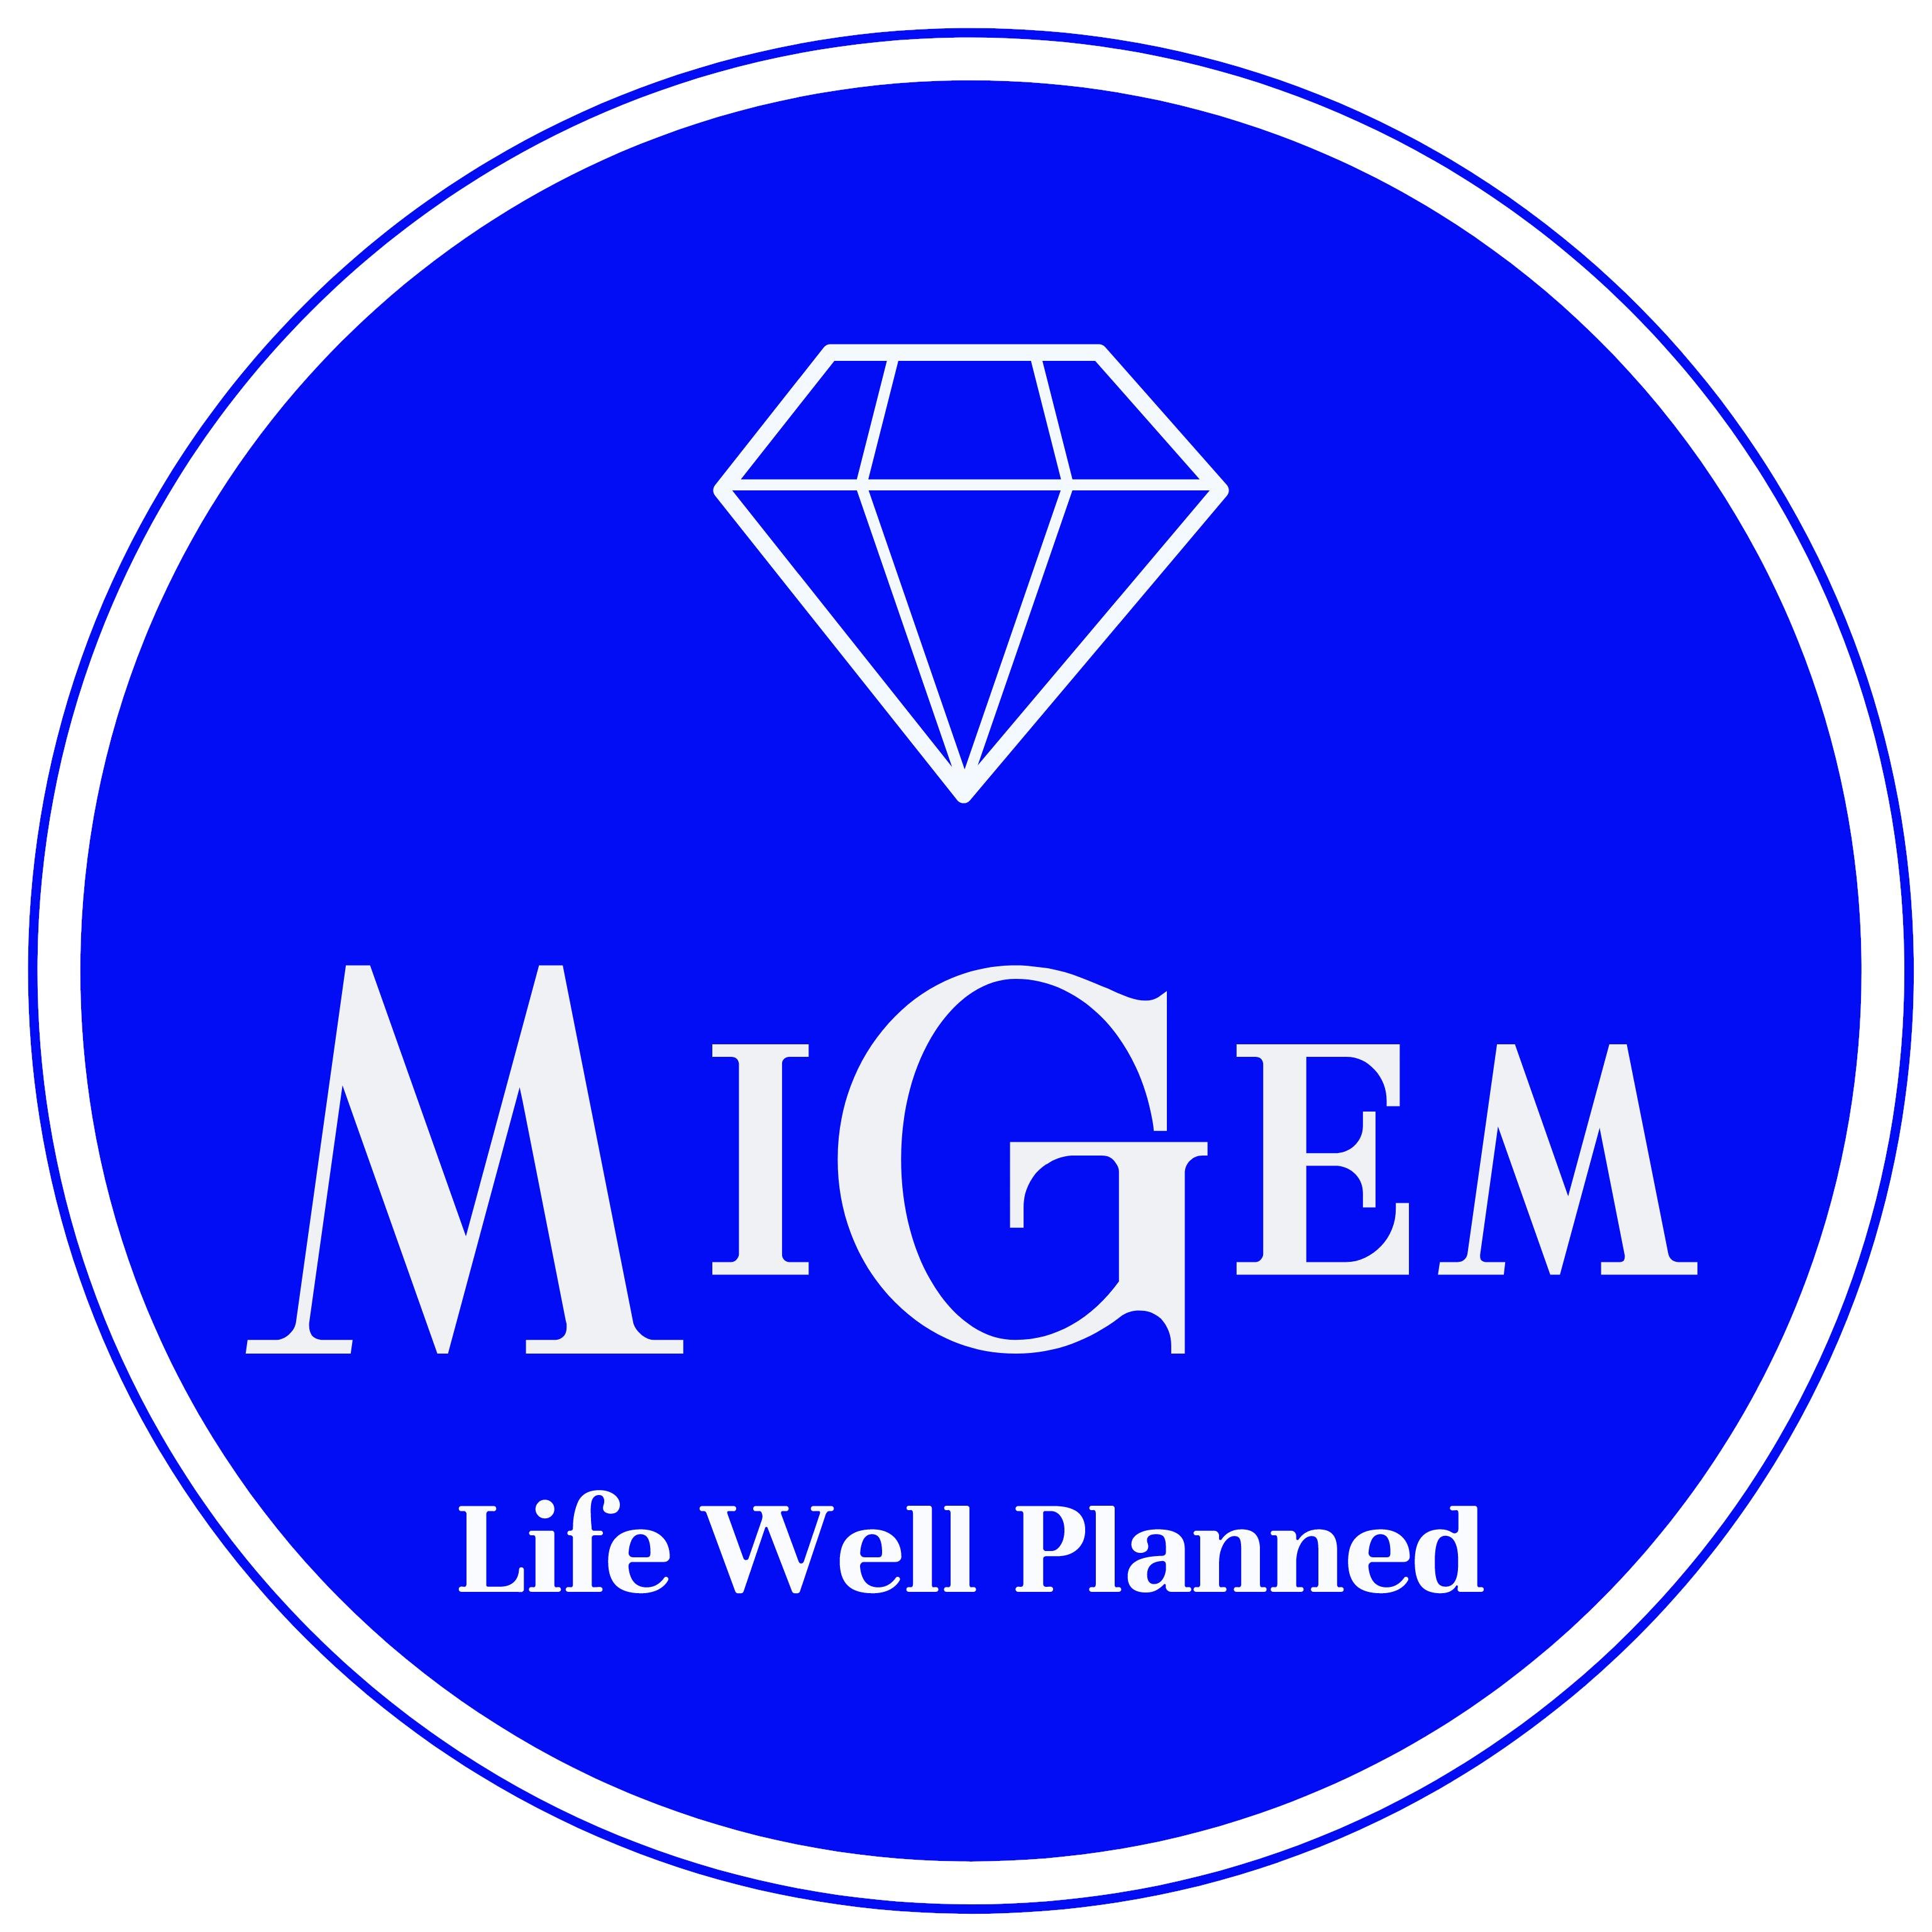 MiGem Limited completes Wills, Lasting Power of Attorney and elements of Estate Planning exclusively with APS Legal & Associates.